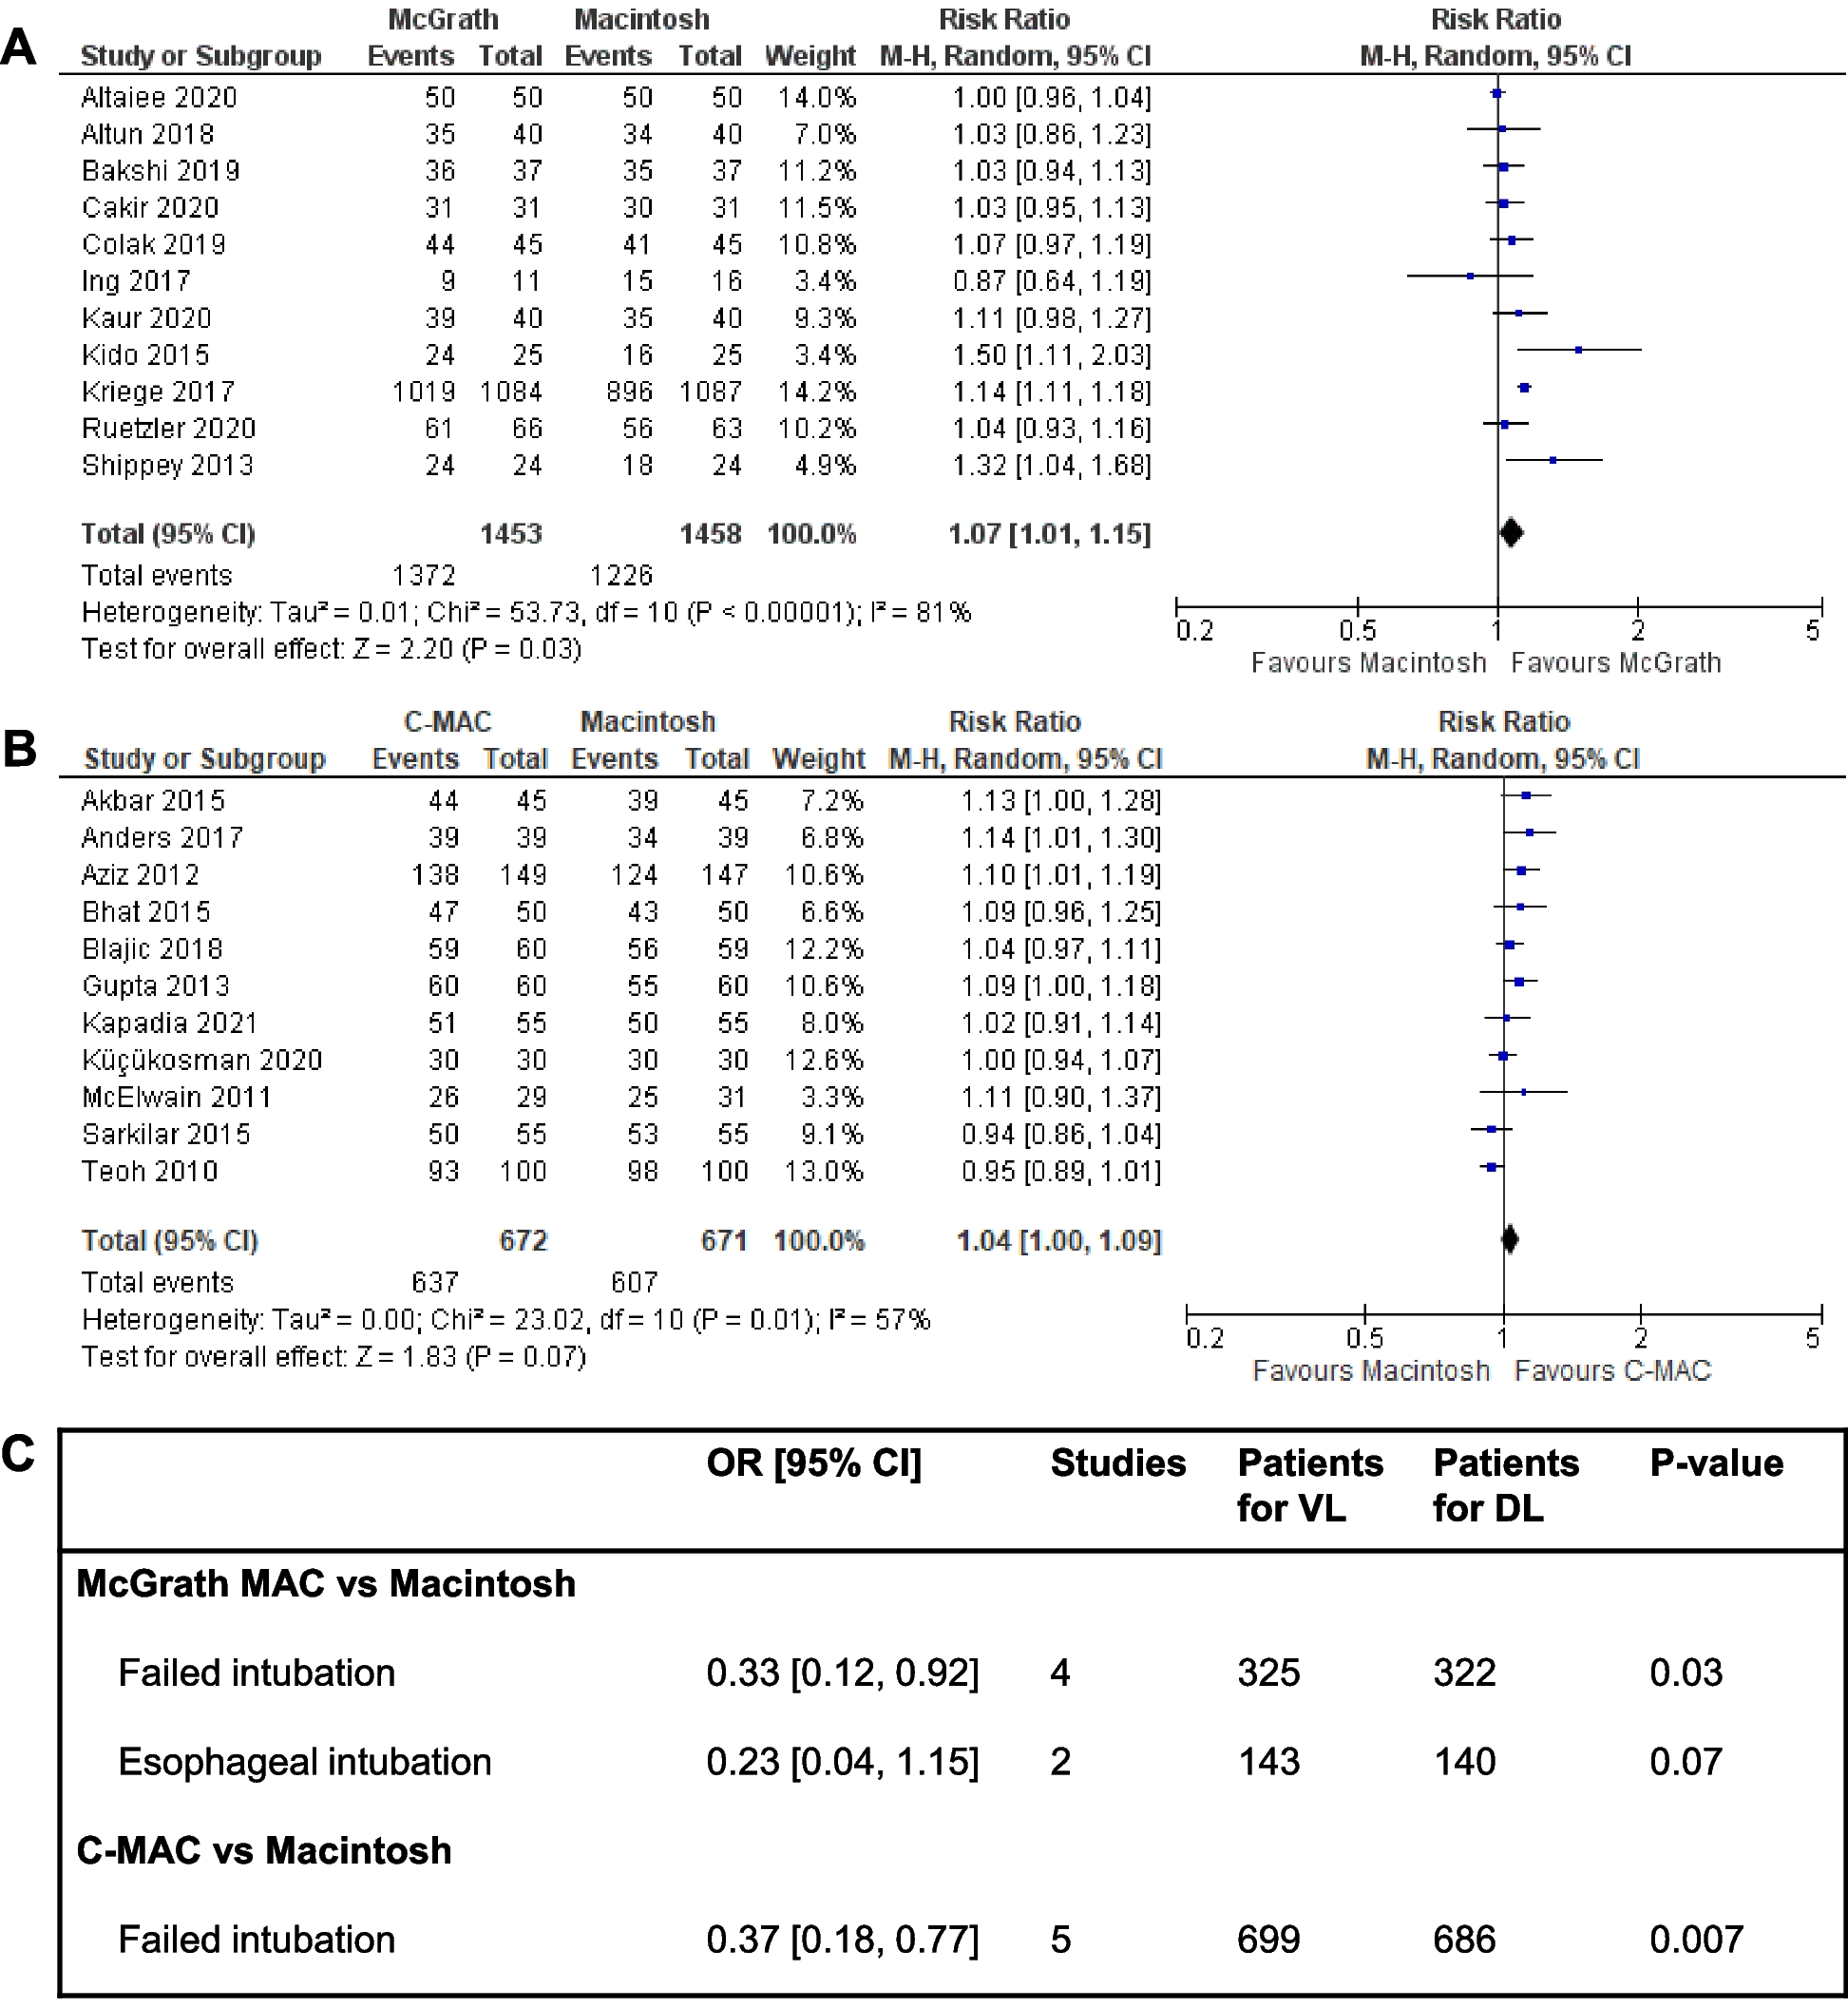 Macintosh-style videolaryngoscope use for tracheal intubation in elective surgical patients revisited: a sub-analysis of the 2022 Cochrane review data